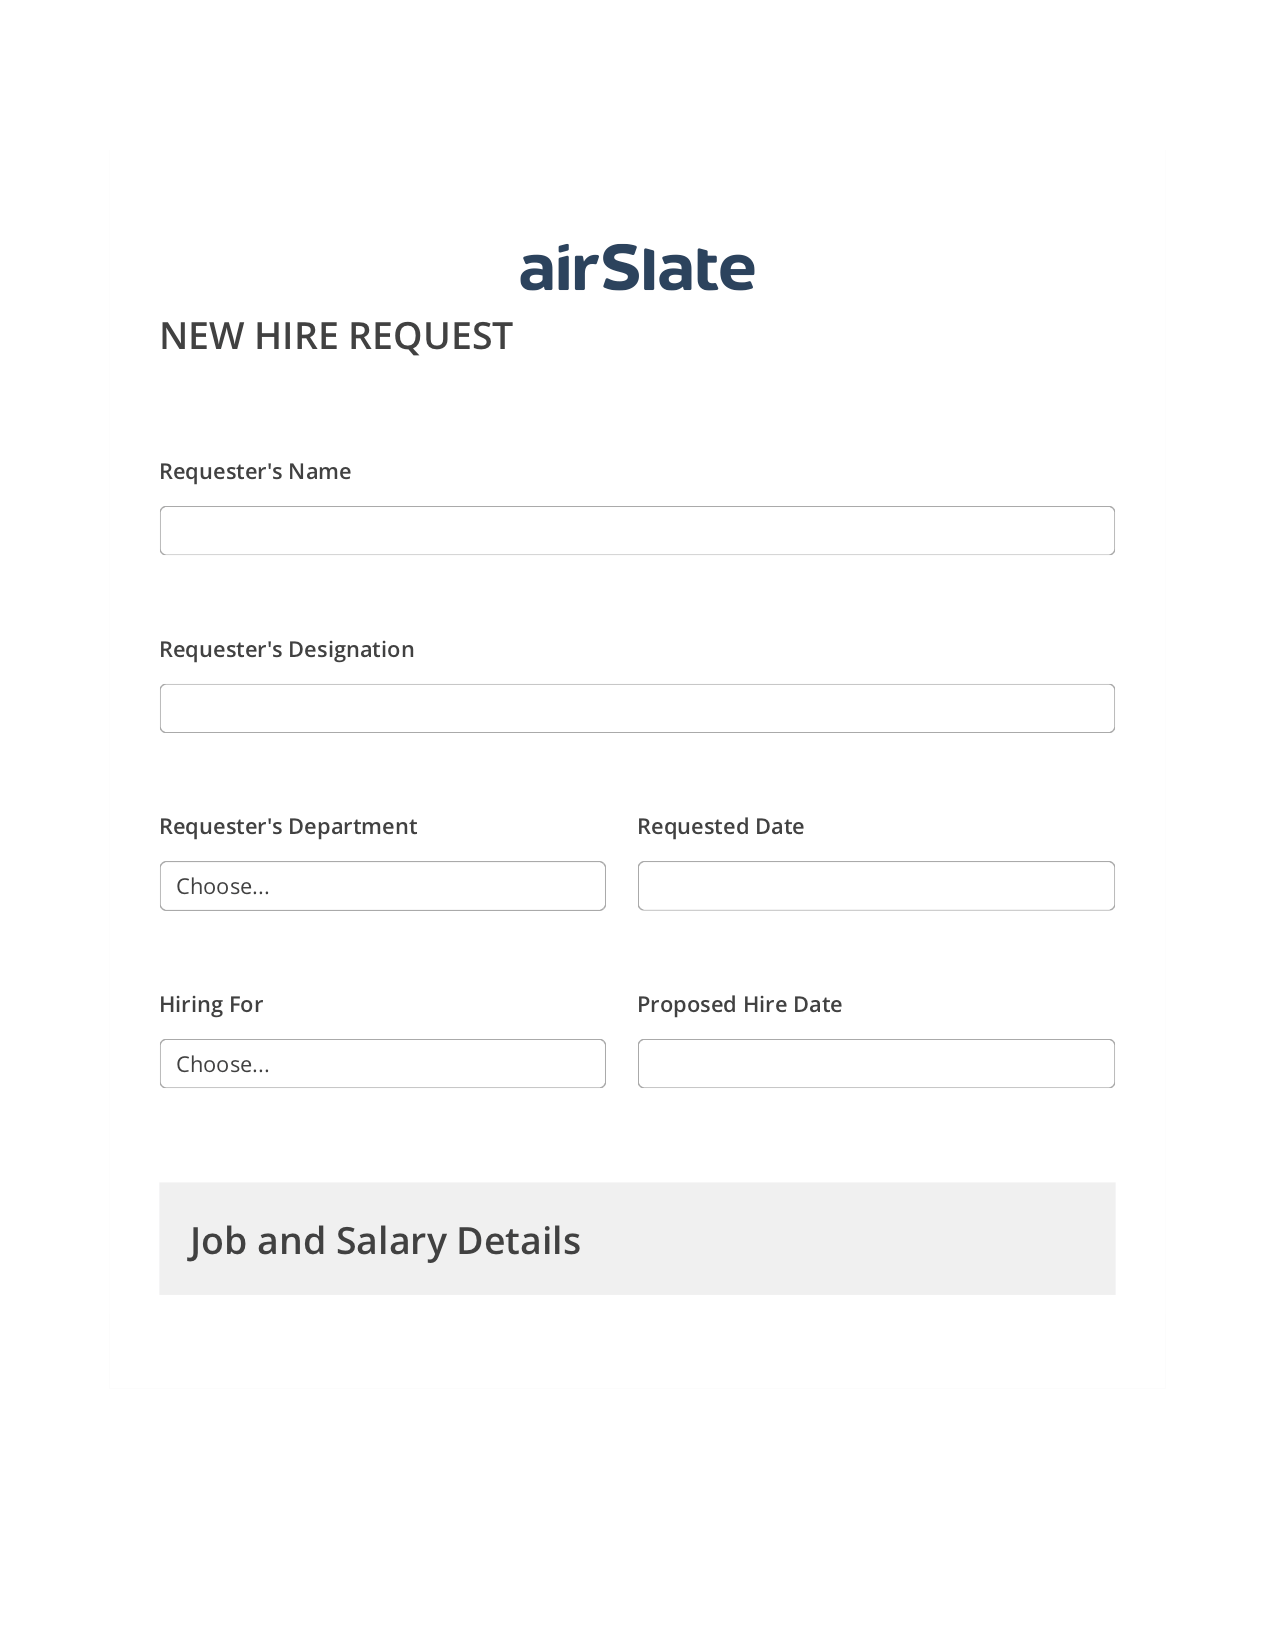 Hiring Request Workflow Pre-fill Document Bot, Create NetSuite Record bot, Archive to Google Drive Bot